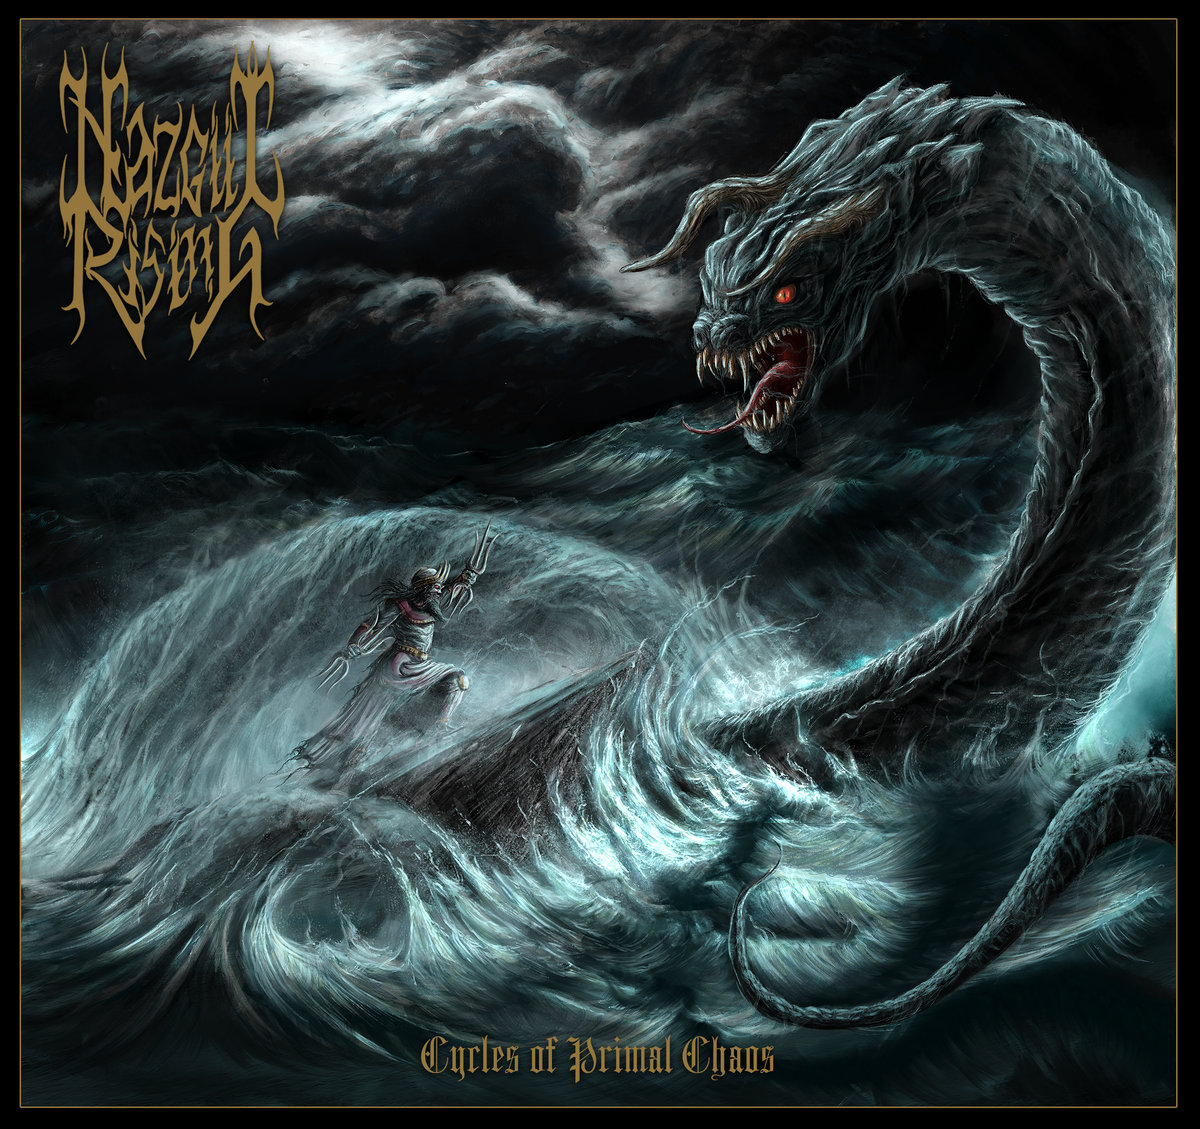 Nazgul Rising - "Cycles Of Primal Chaos" - 2022